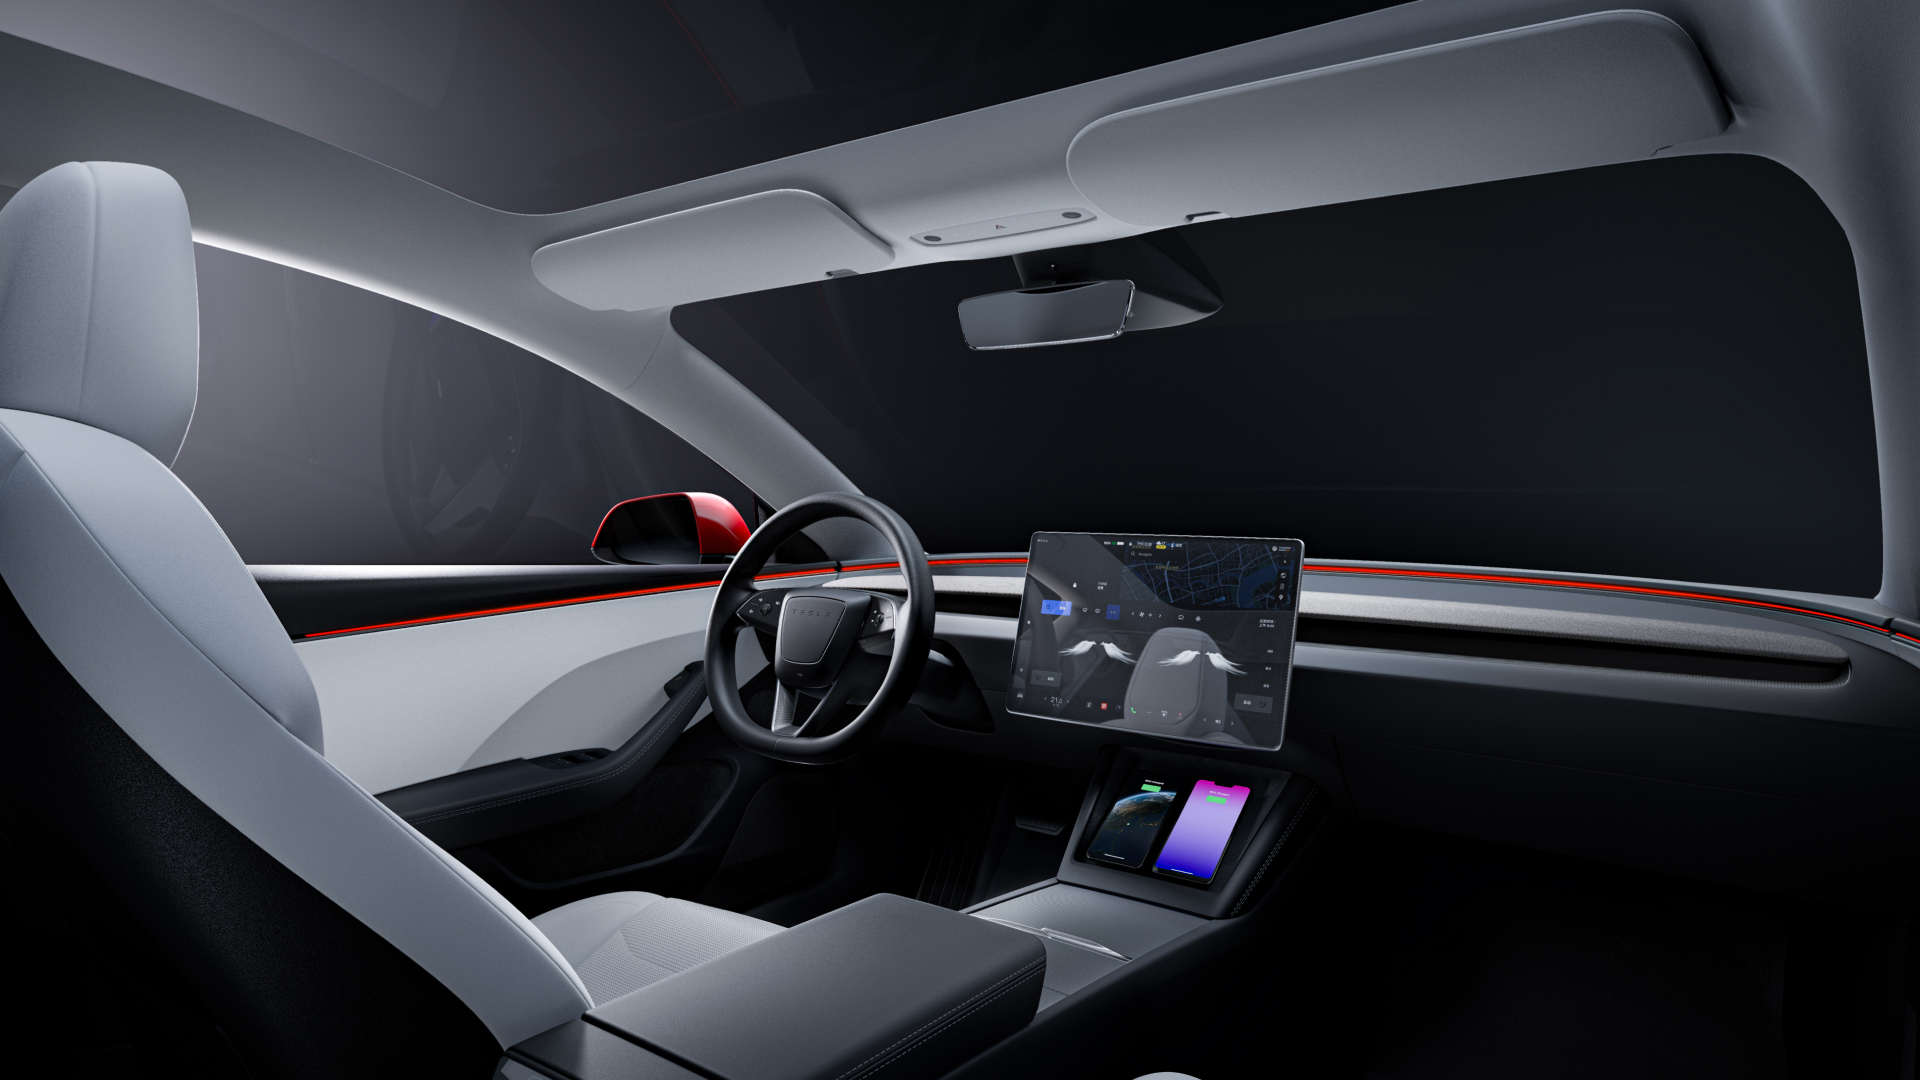 Tesla Model 3 Project Highland Interior And New Features Explained 